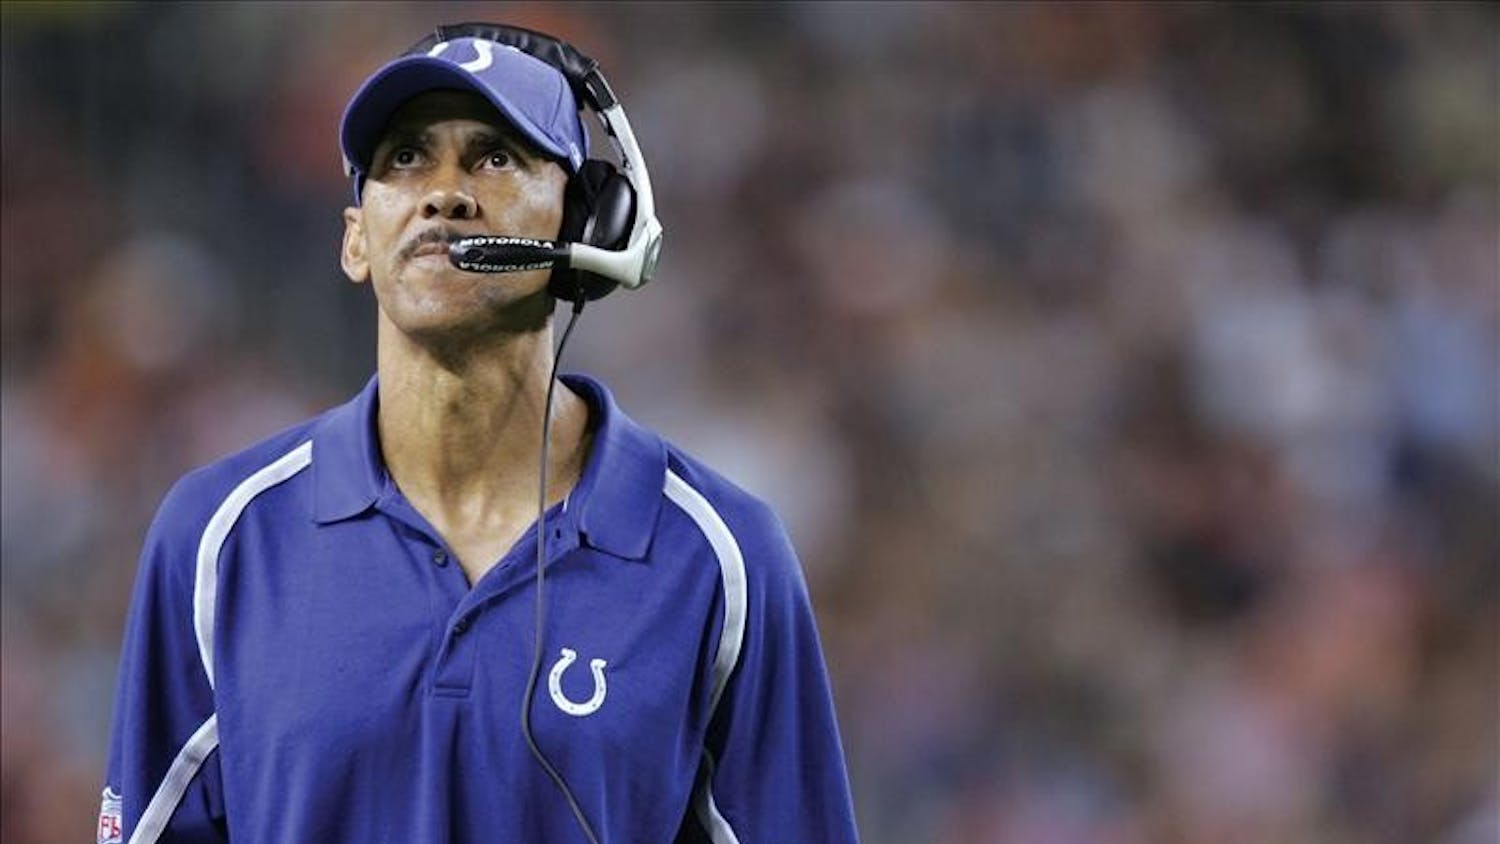 Indianapolis Colts head coach Tony Dungy looks to the sky as his team falls behind in the second half against the Broncos in Denver Aug. 27, 2005. The Broncos ended up winning, 37-24.